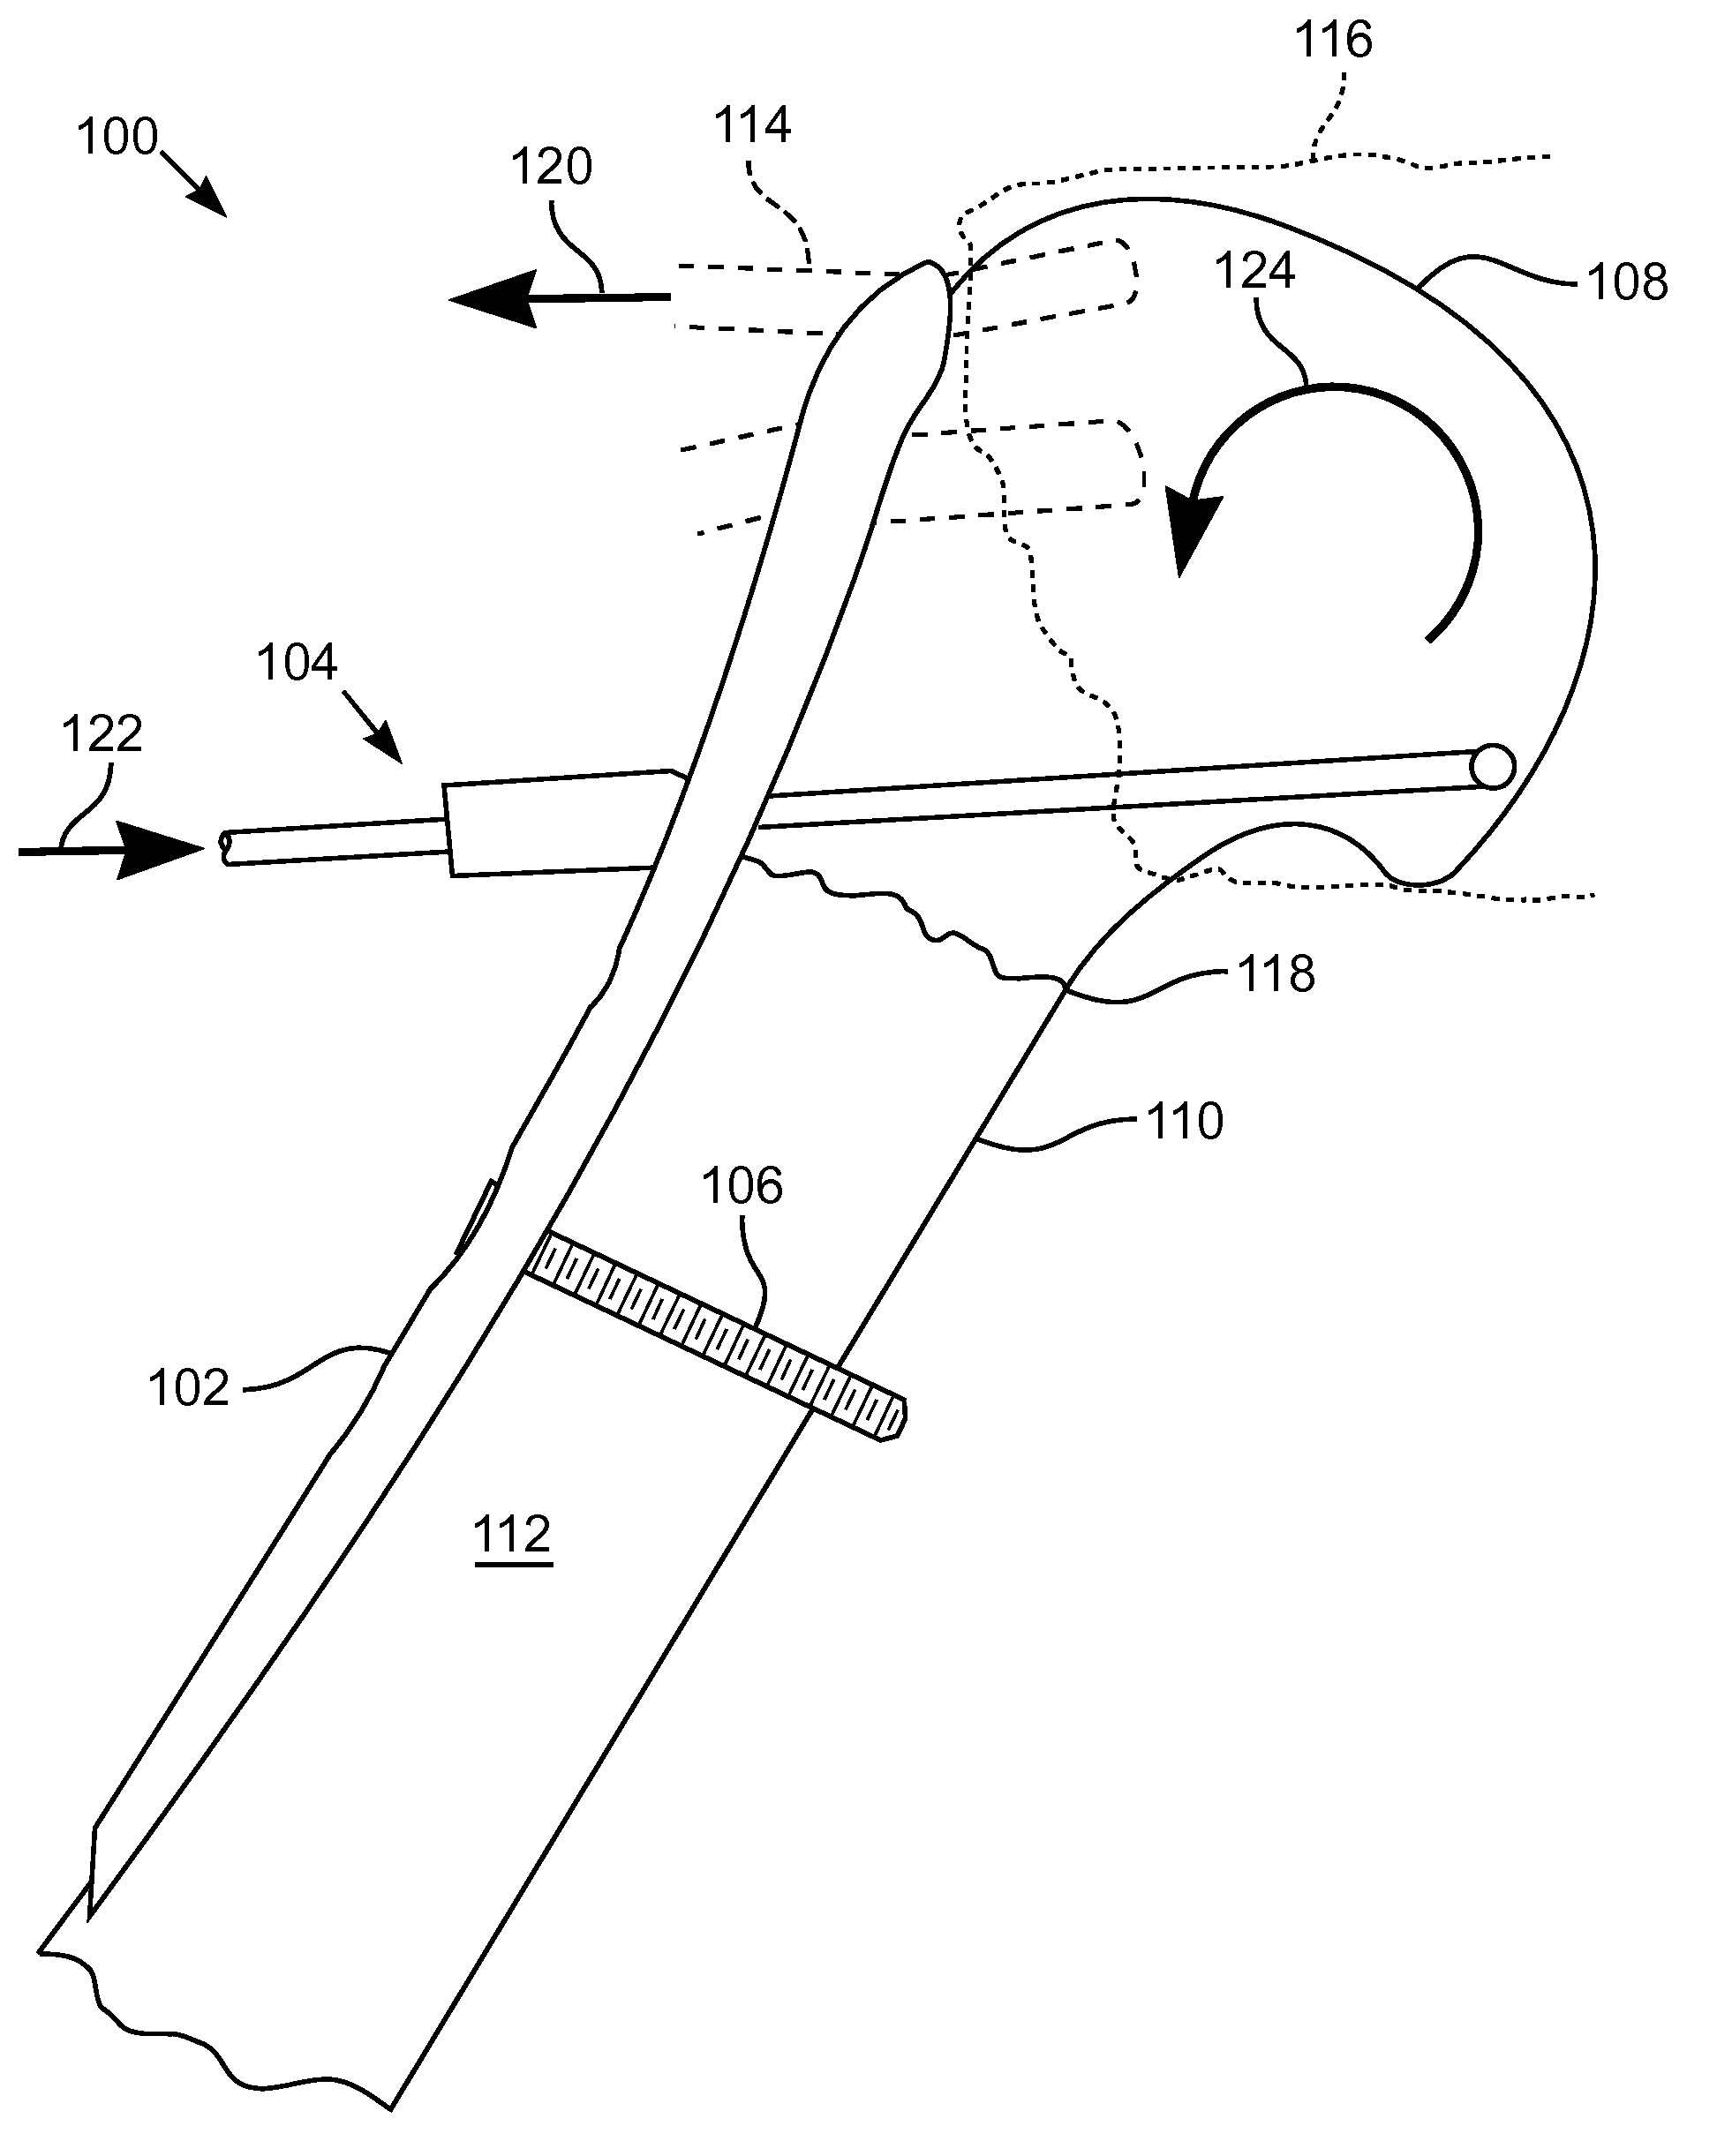 Proximal humeral fracture reduction and fixation device